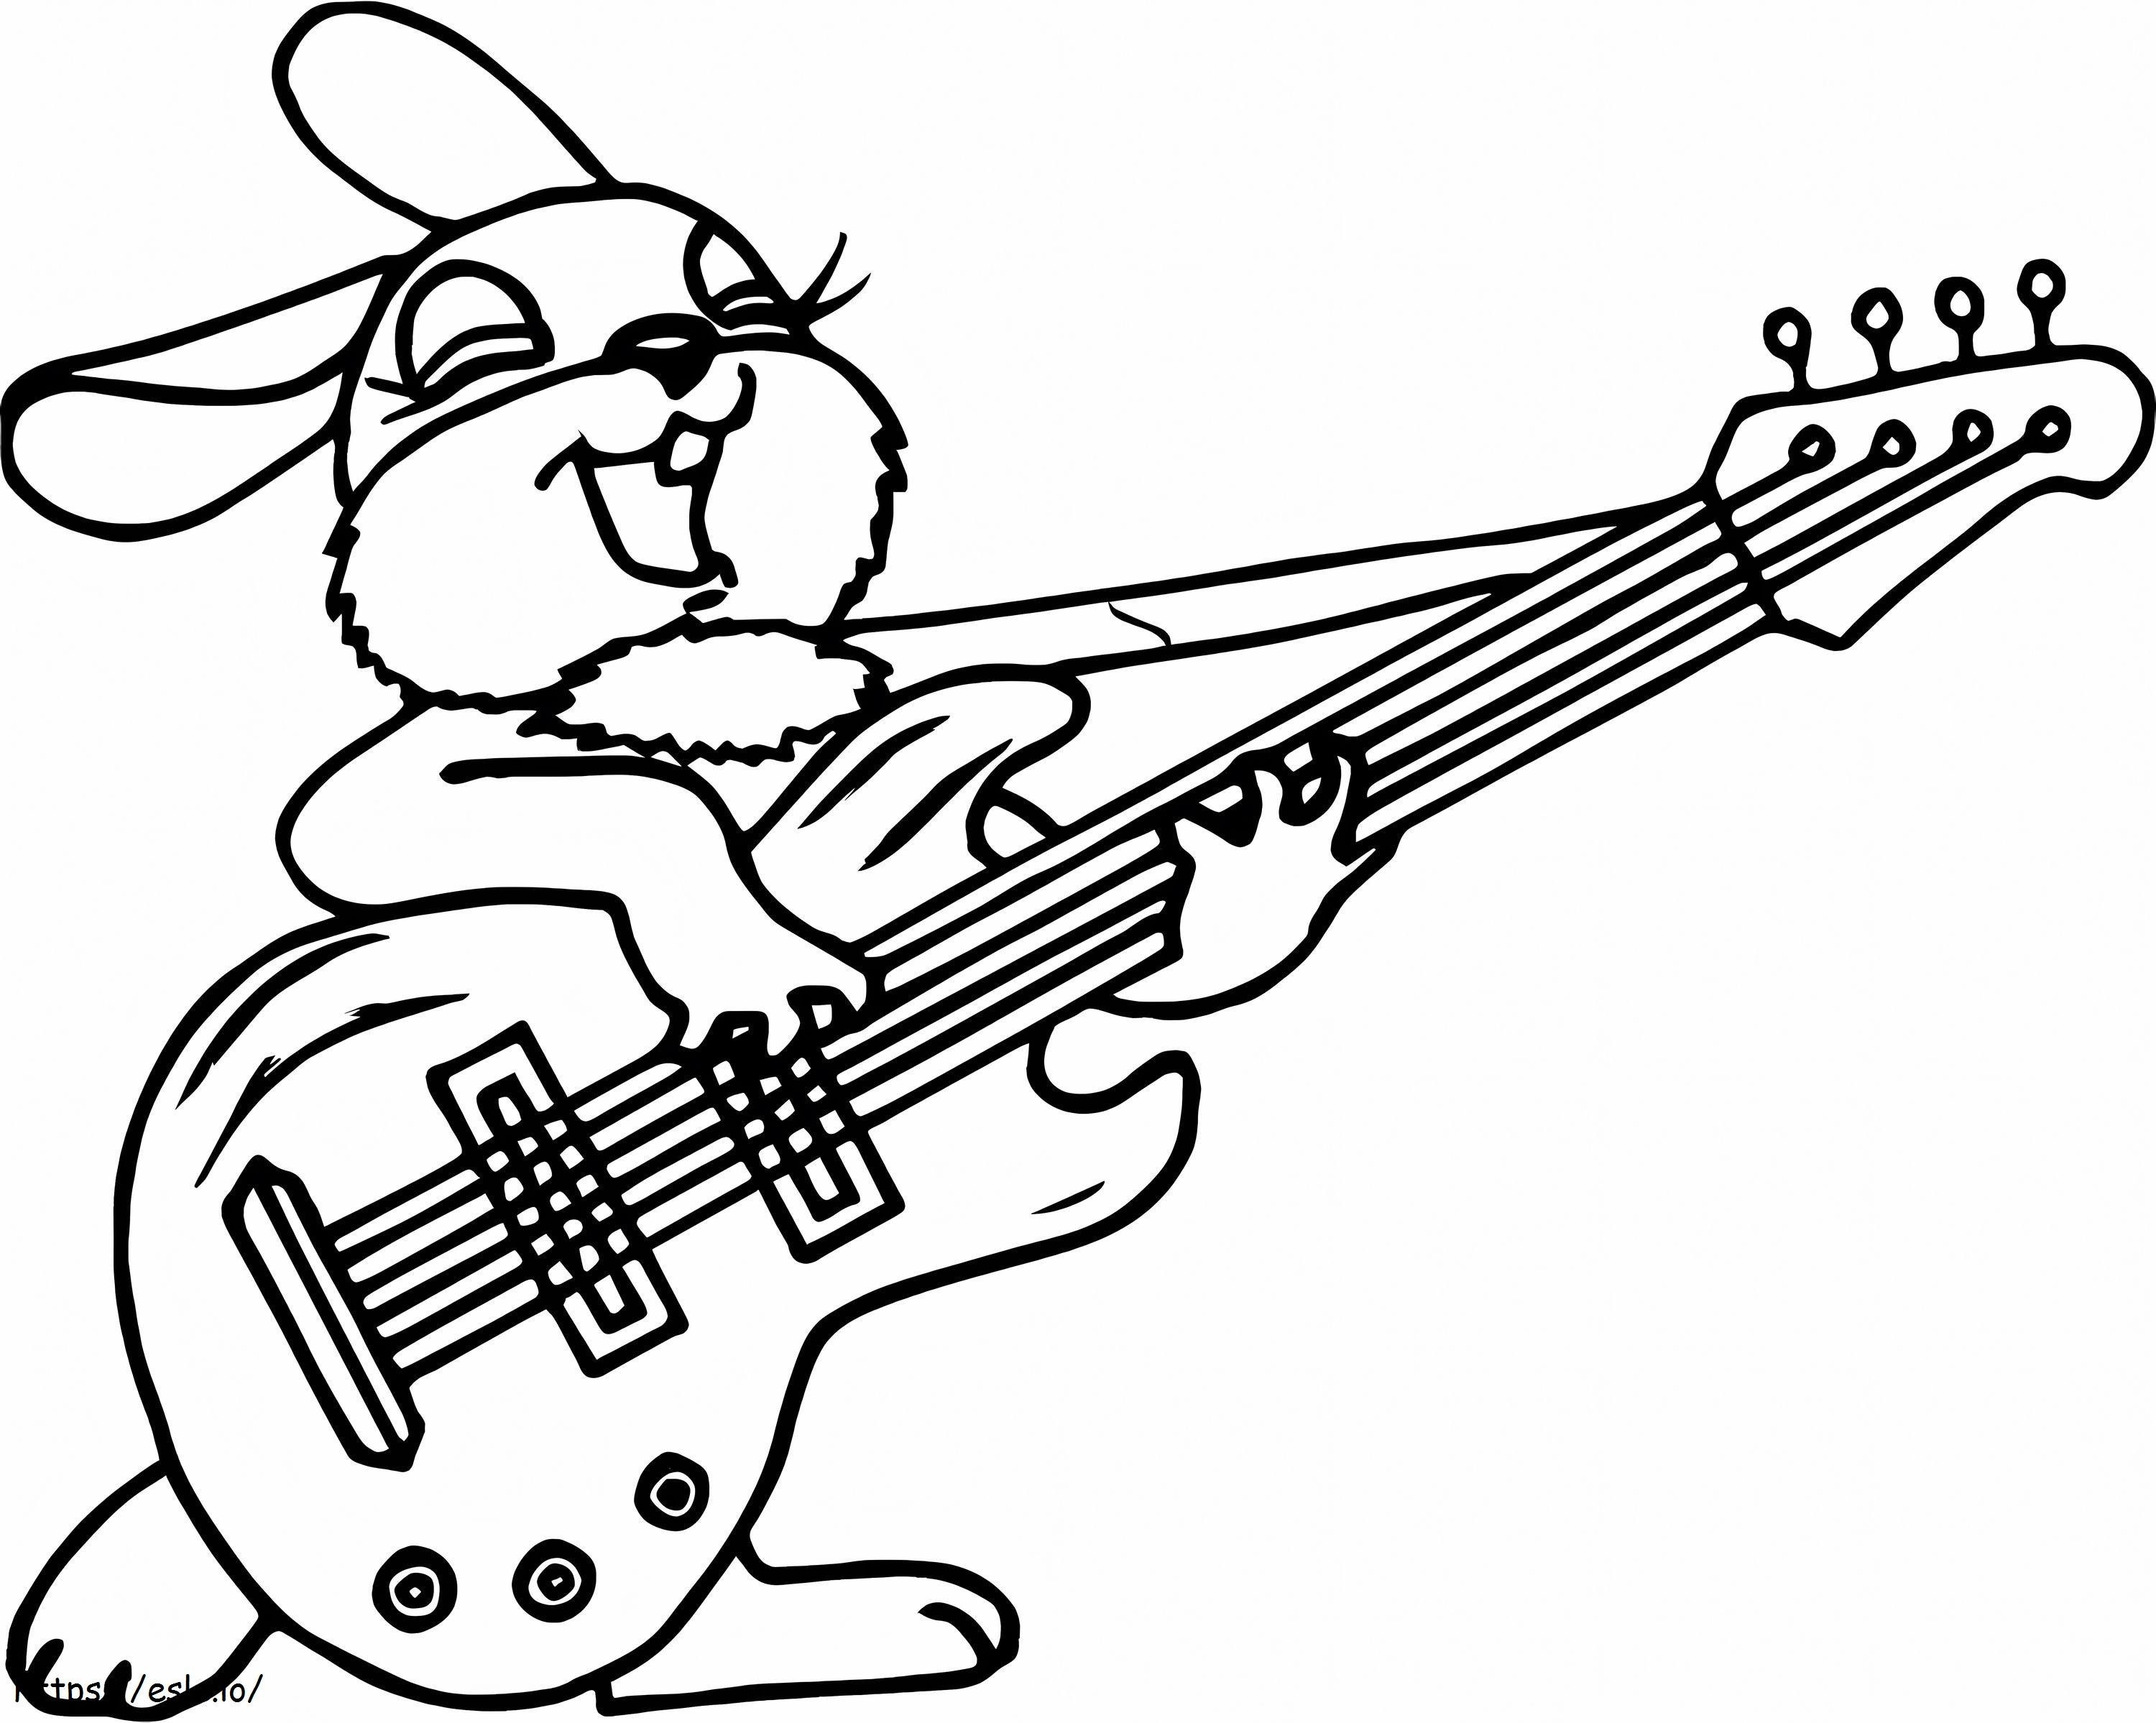 Rabbit Playing Musical Instruments coloring page